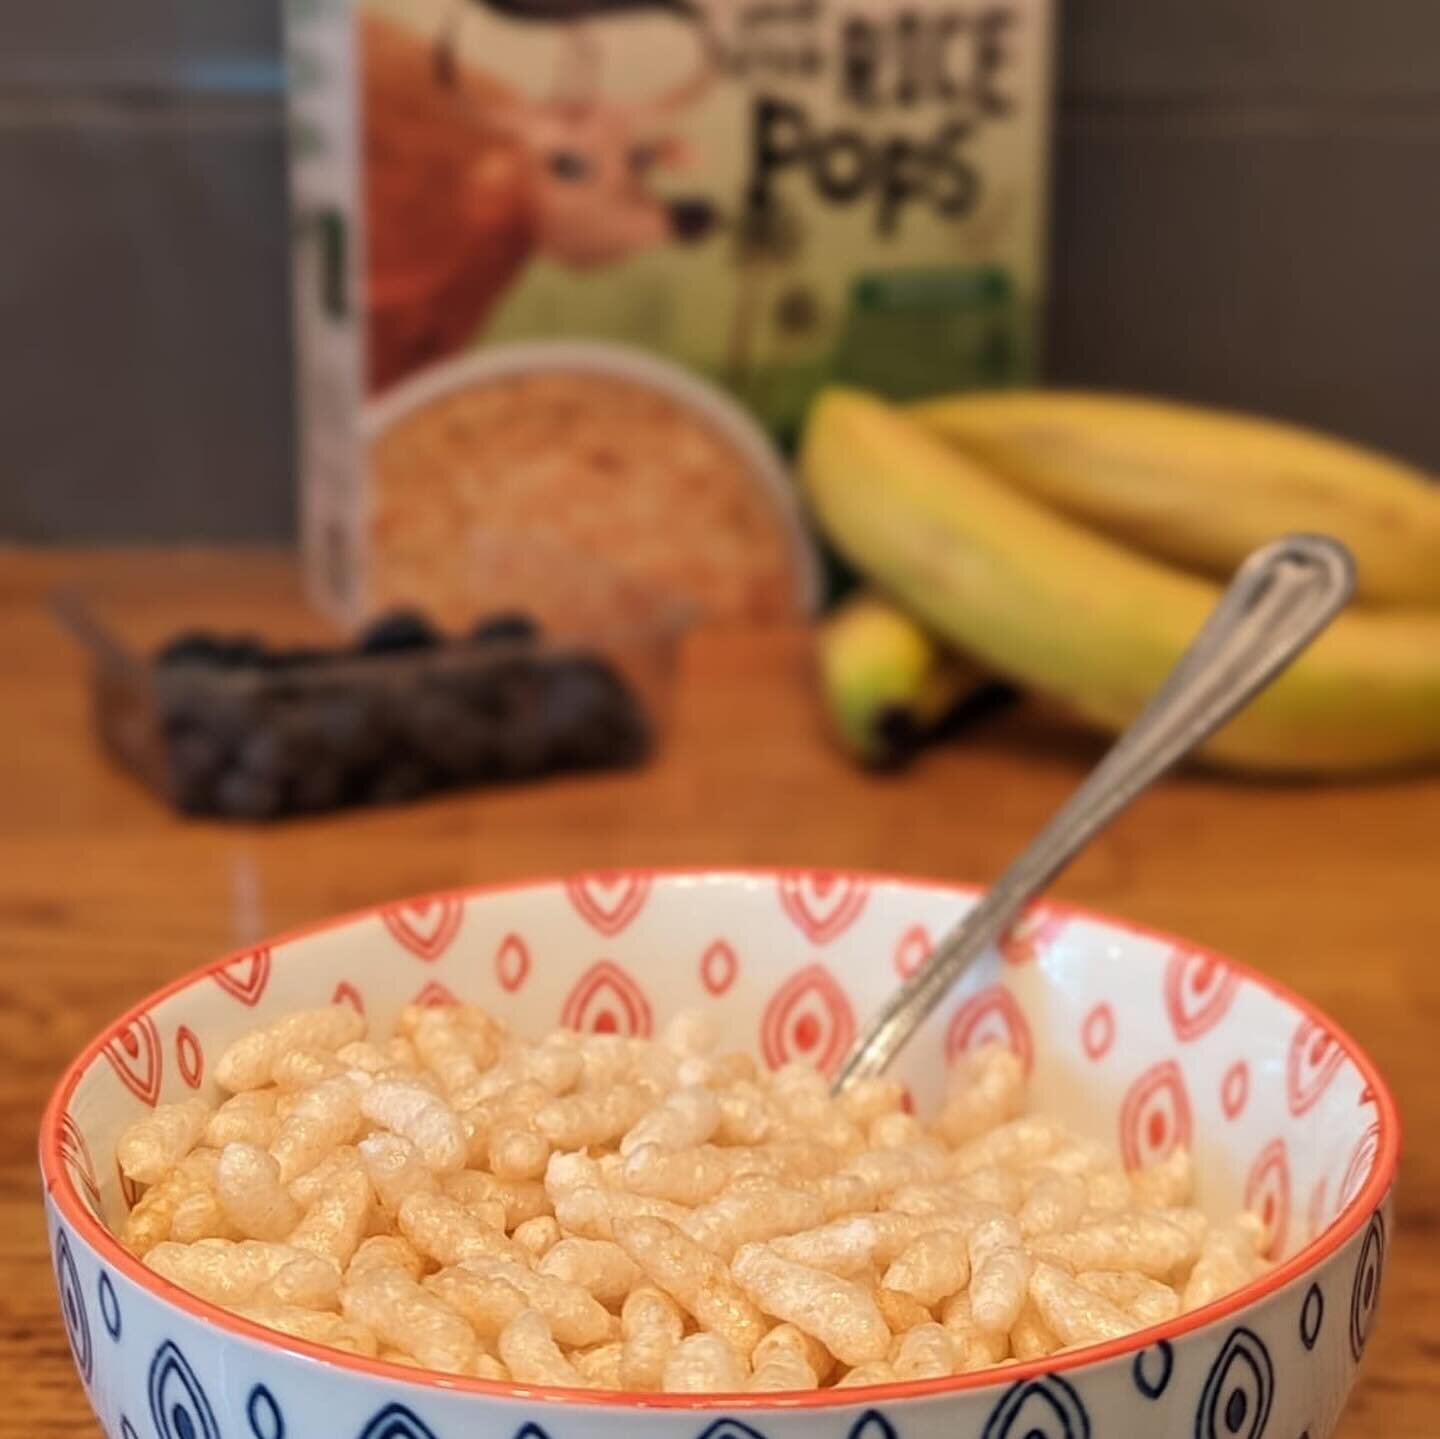 Today is #worldwildlifeday and we&rsquo;re marking it with a bowl of @ibisriceuk Organic Wholegrain Rice Pops &mdash; endorsed by @chrisgpackham2, it&rsquo;s a truly planet-positive breakfast cereal with conservation at its heart. Swipe for a &lsquo;